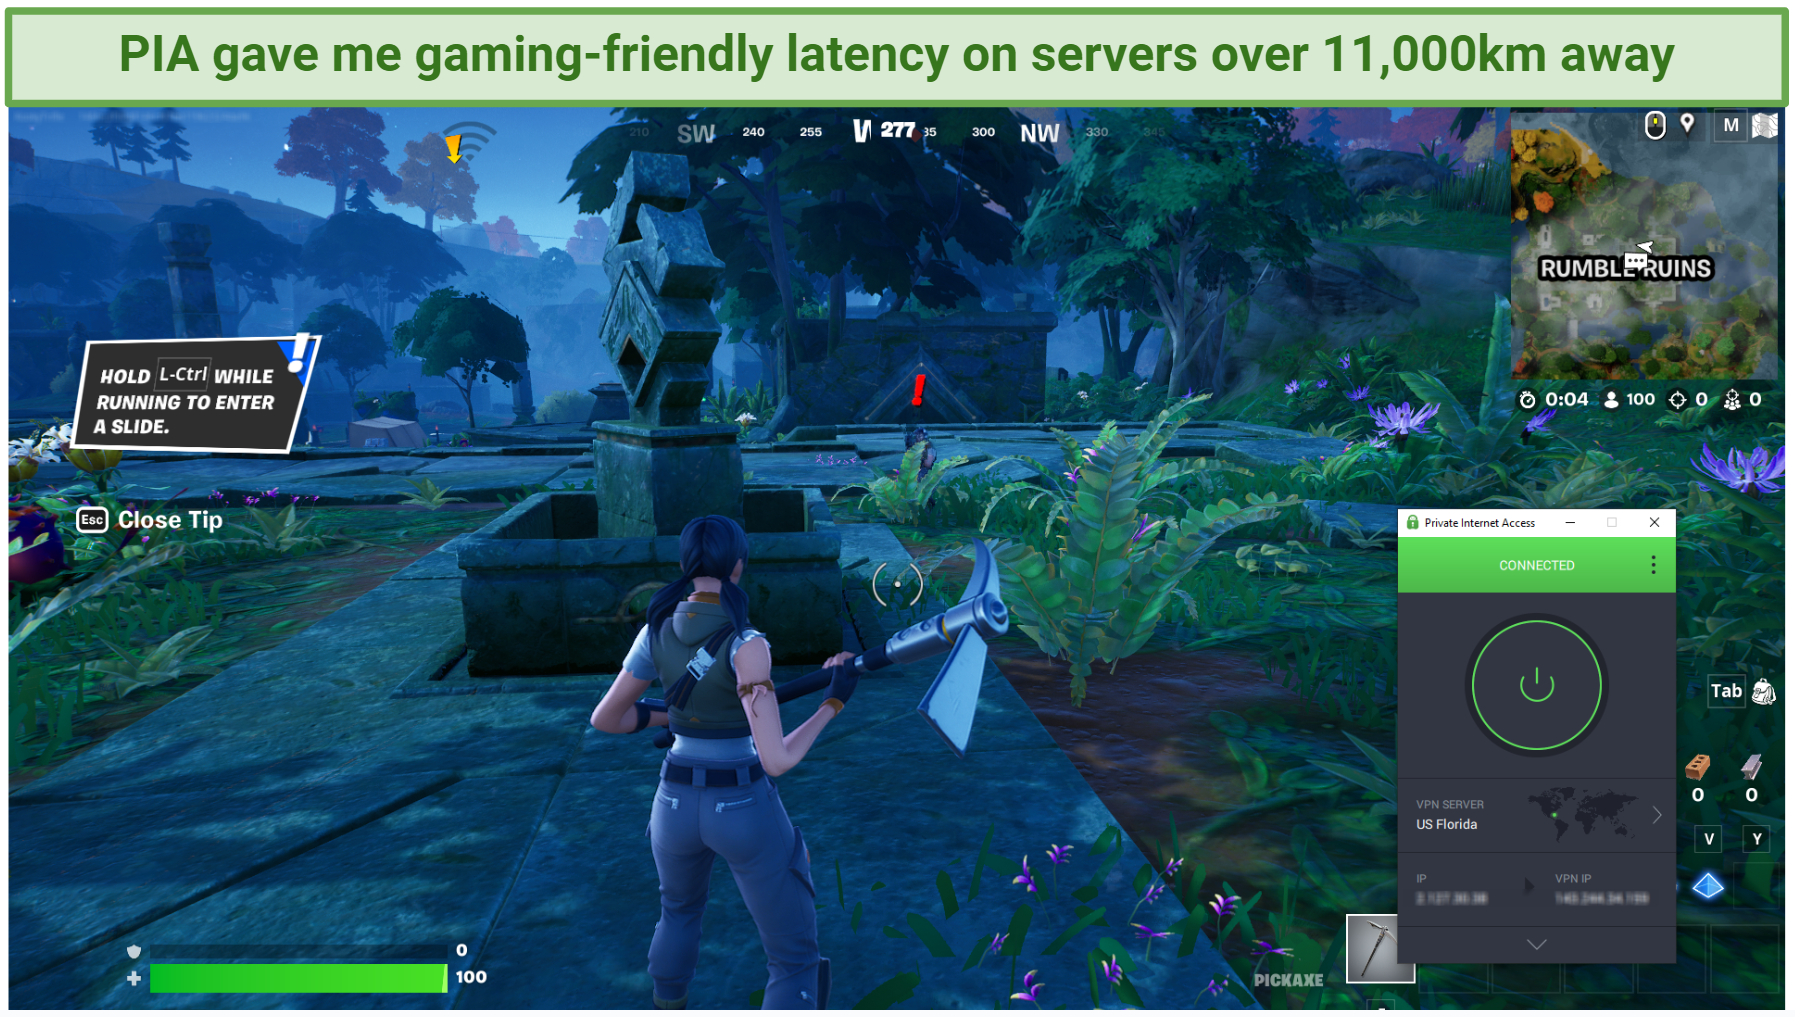 Screenshot of the PIA app connected to a server in Florida over a game of Fortnite